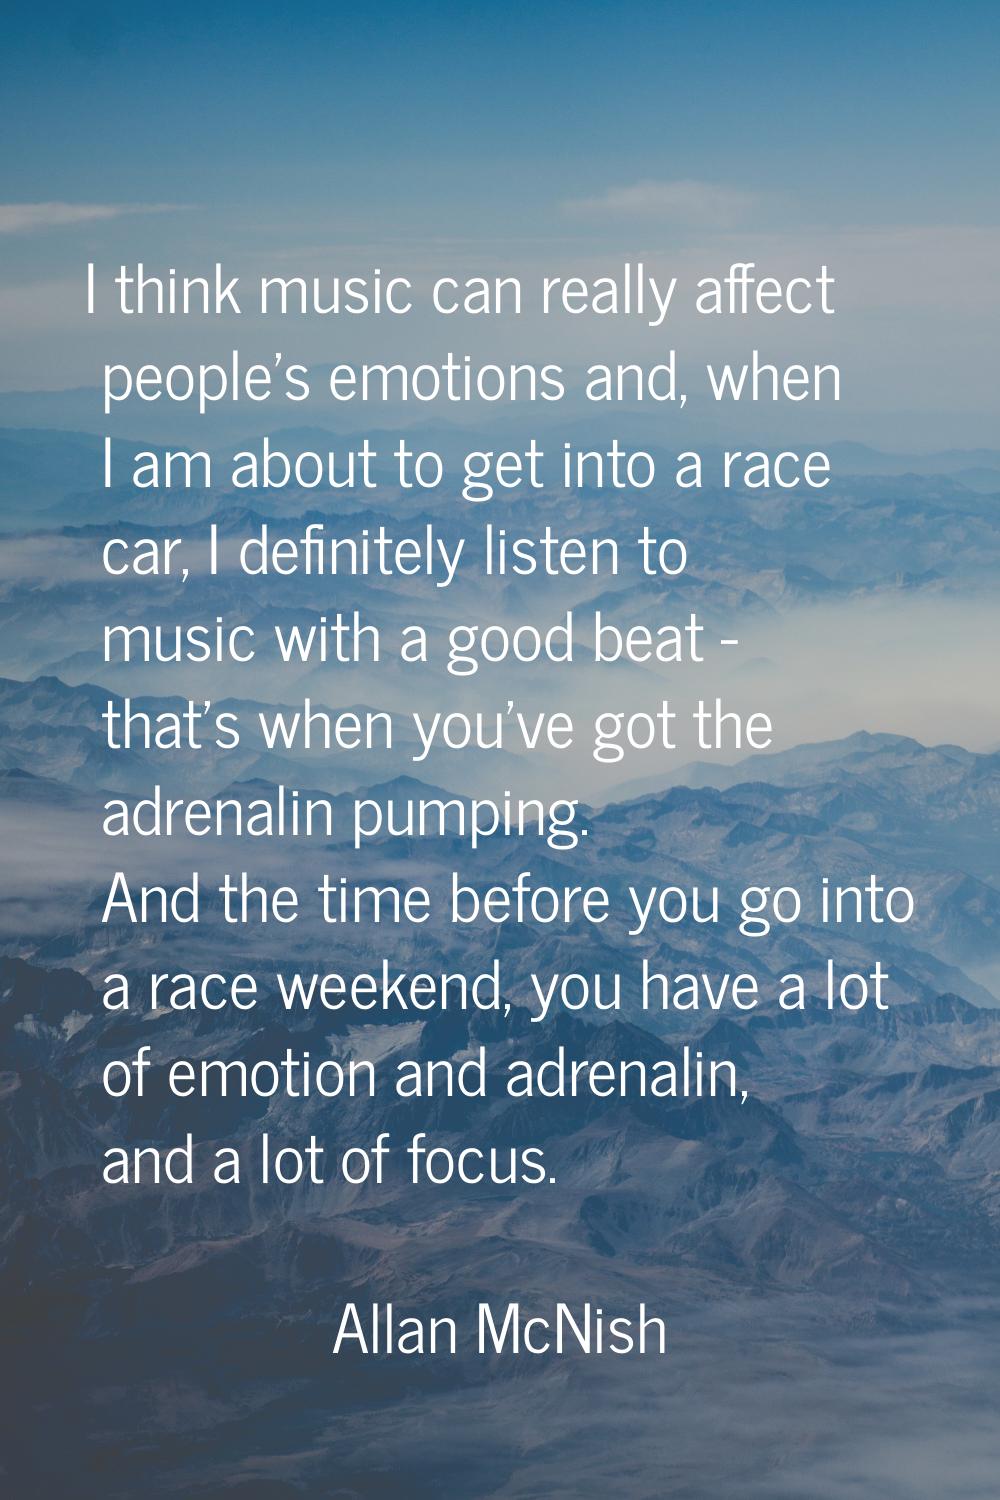 I think music can really affect people's emotions and, when I am about to get into a race car, I de